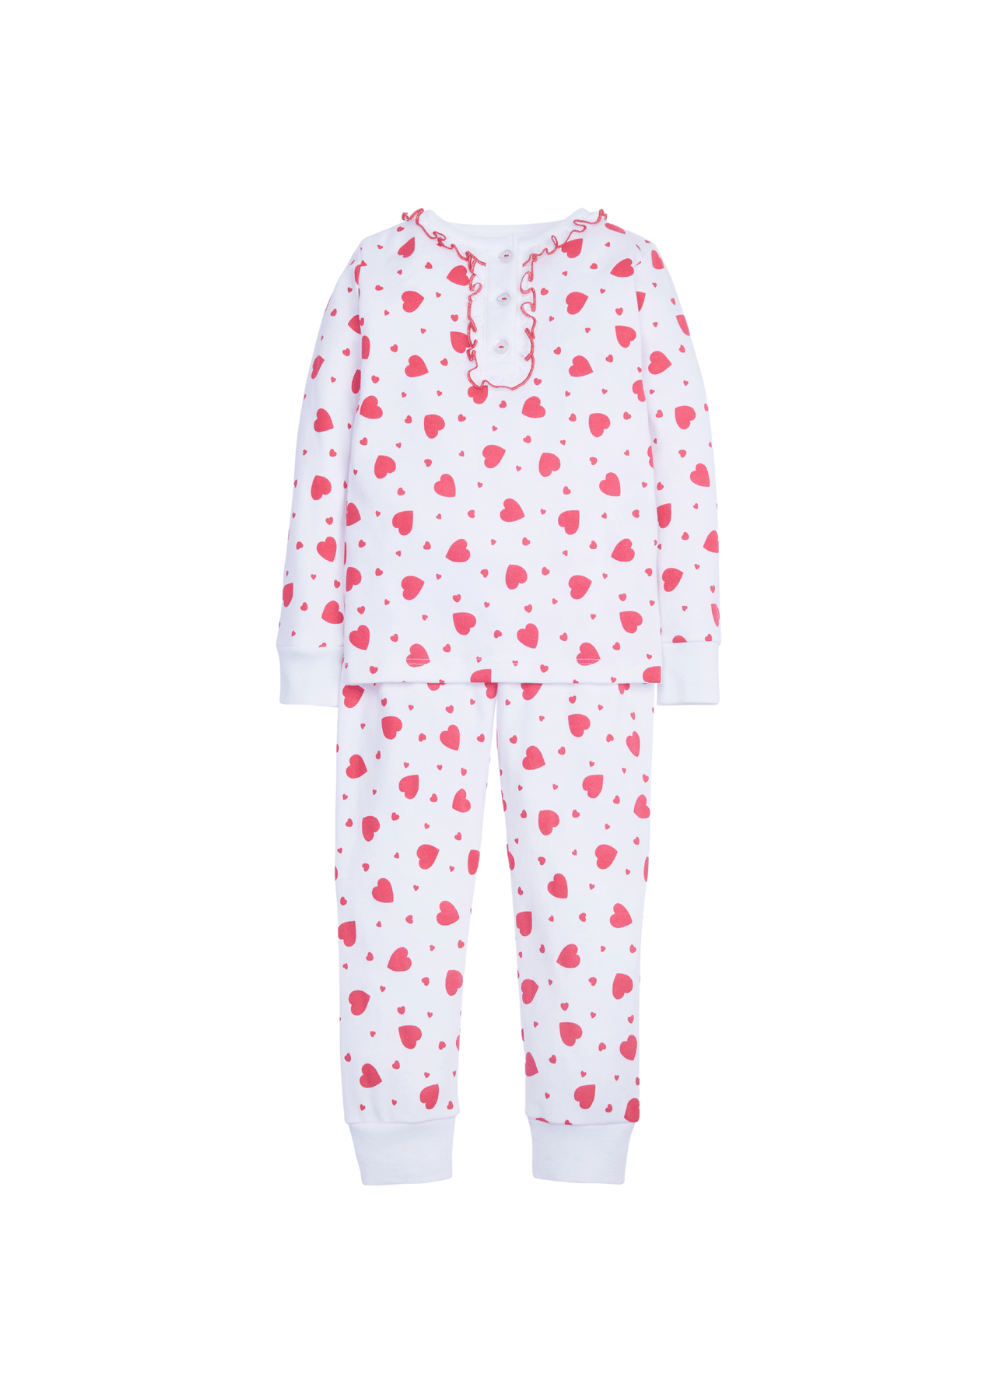 seguridadindustrialcr girls printed jammies with red hearts